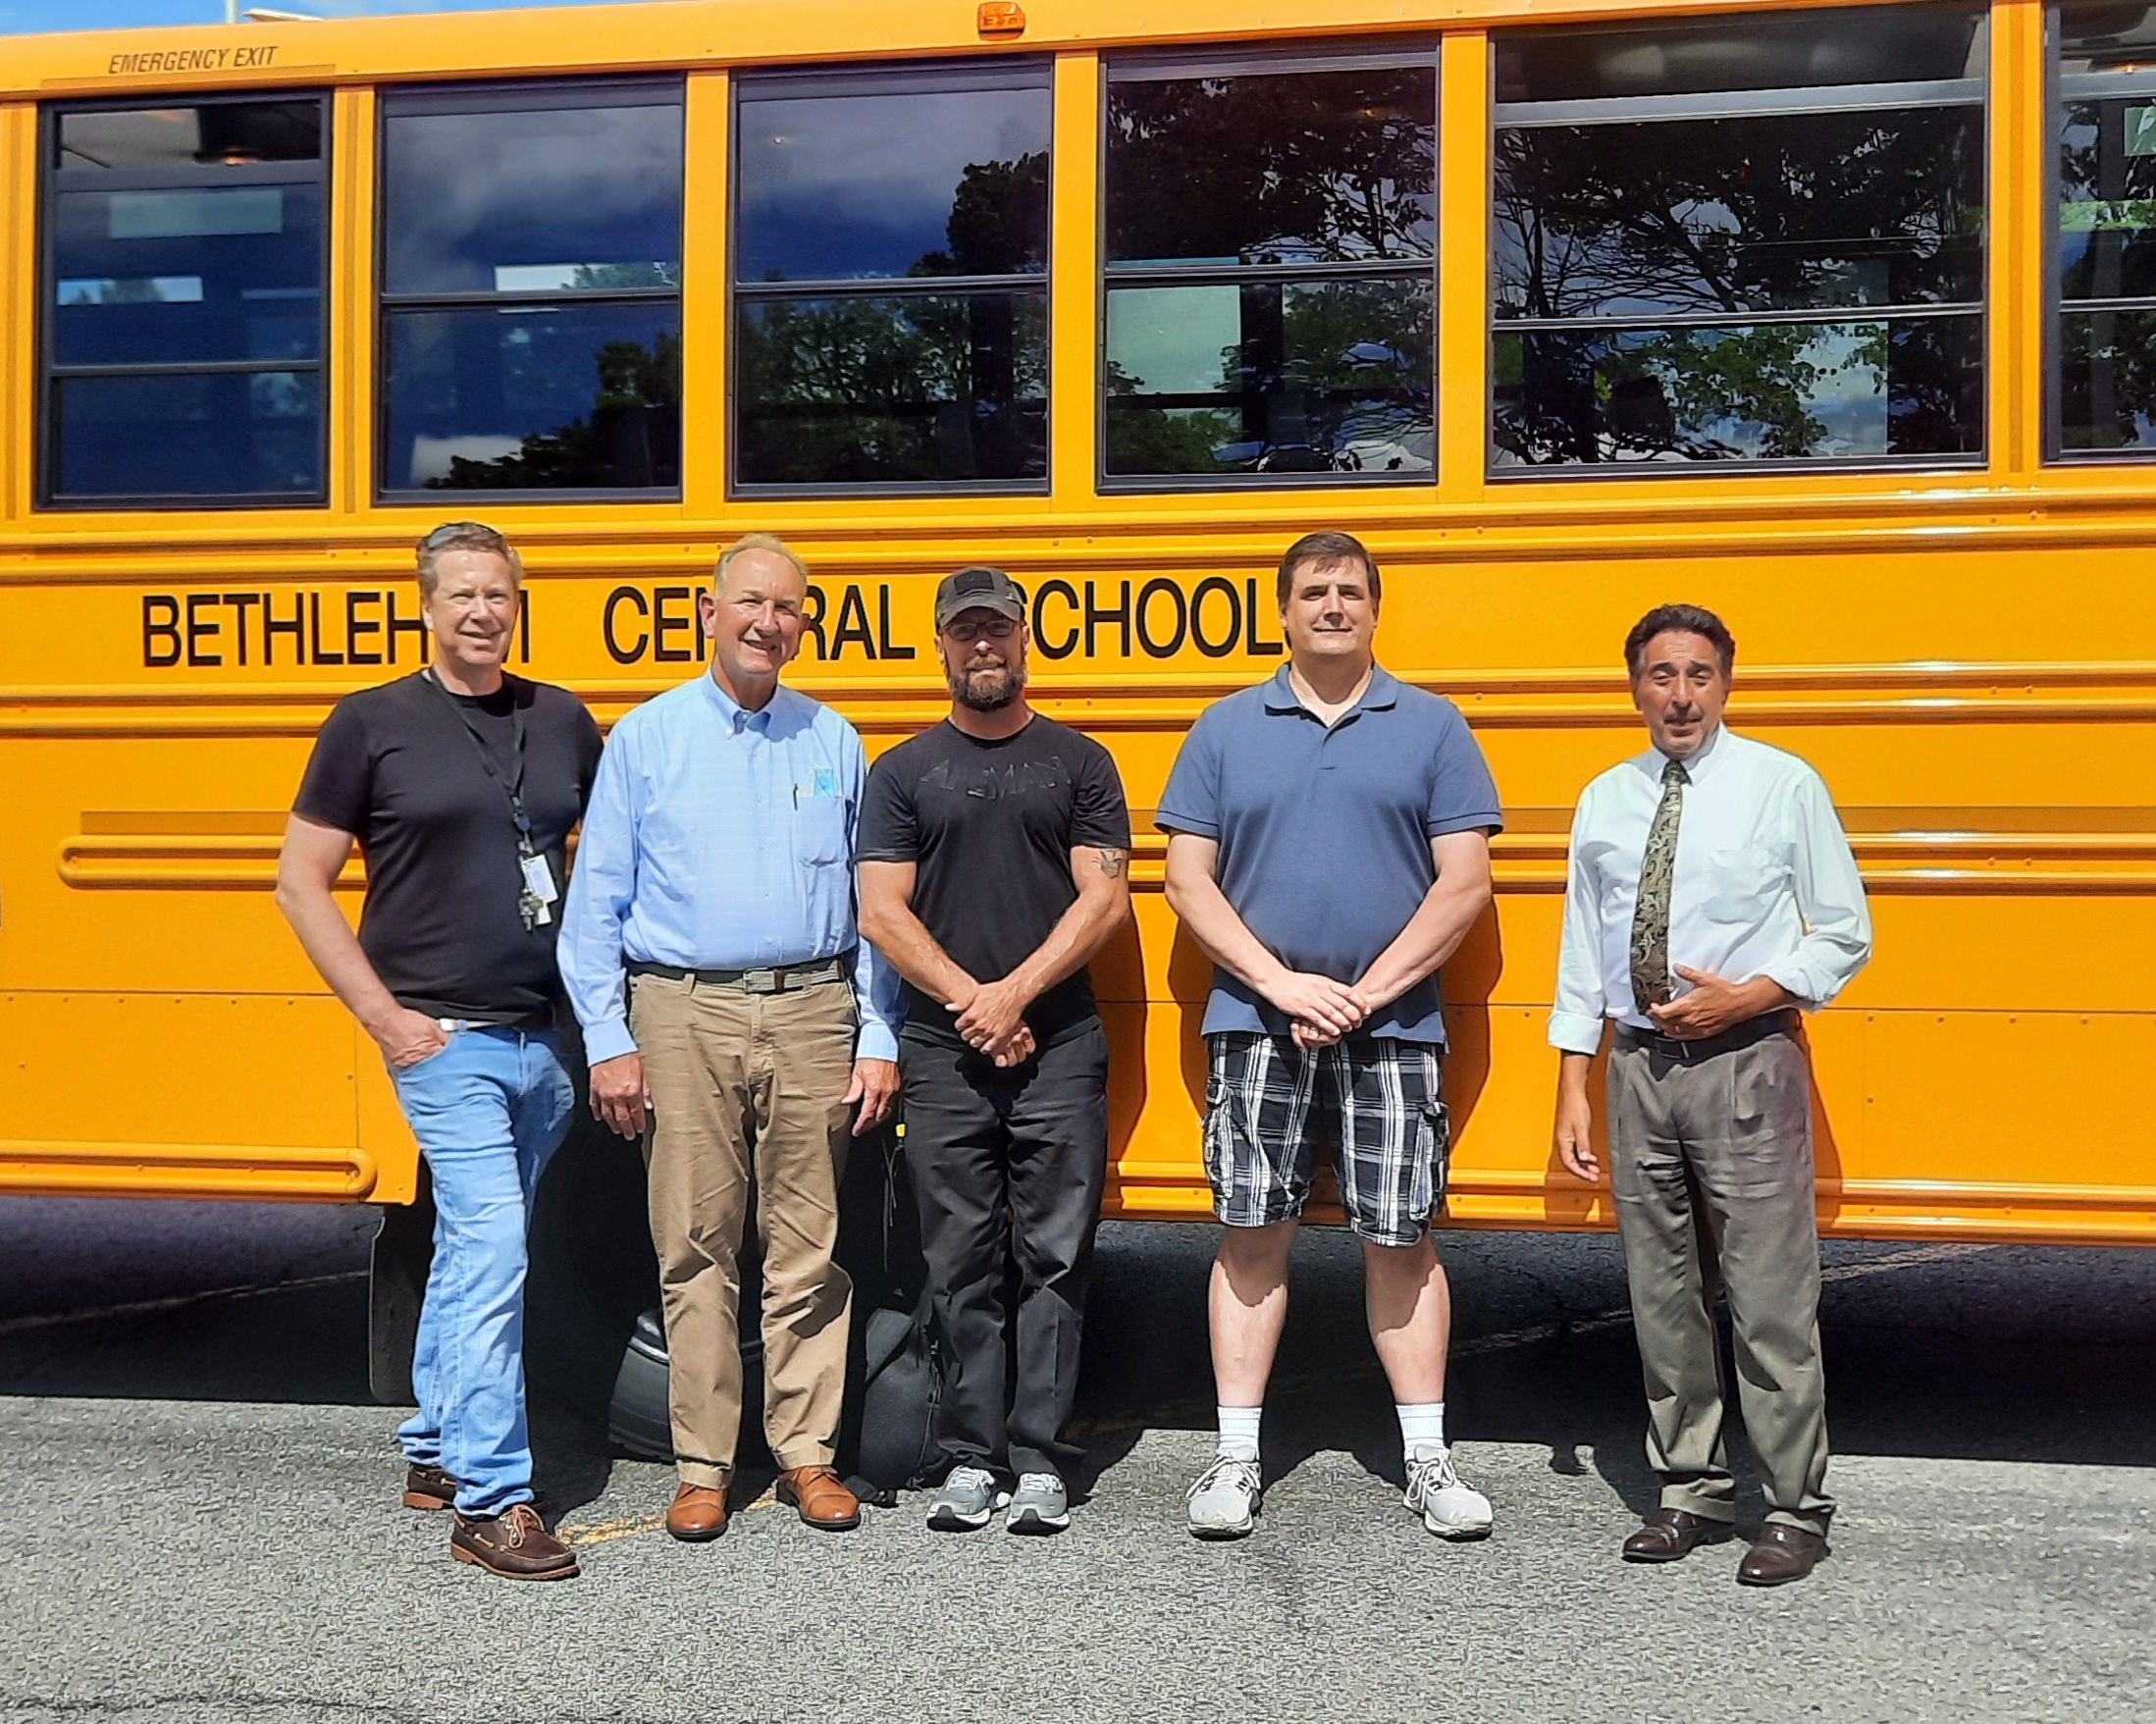 five people pose in front of school bus